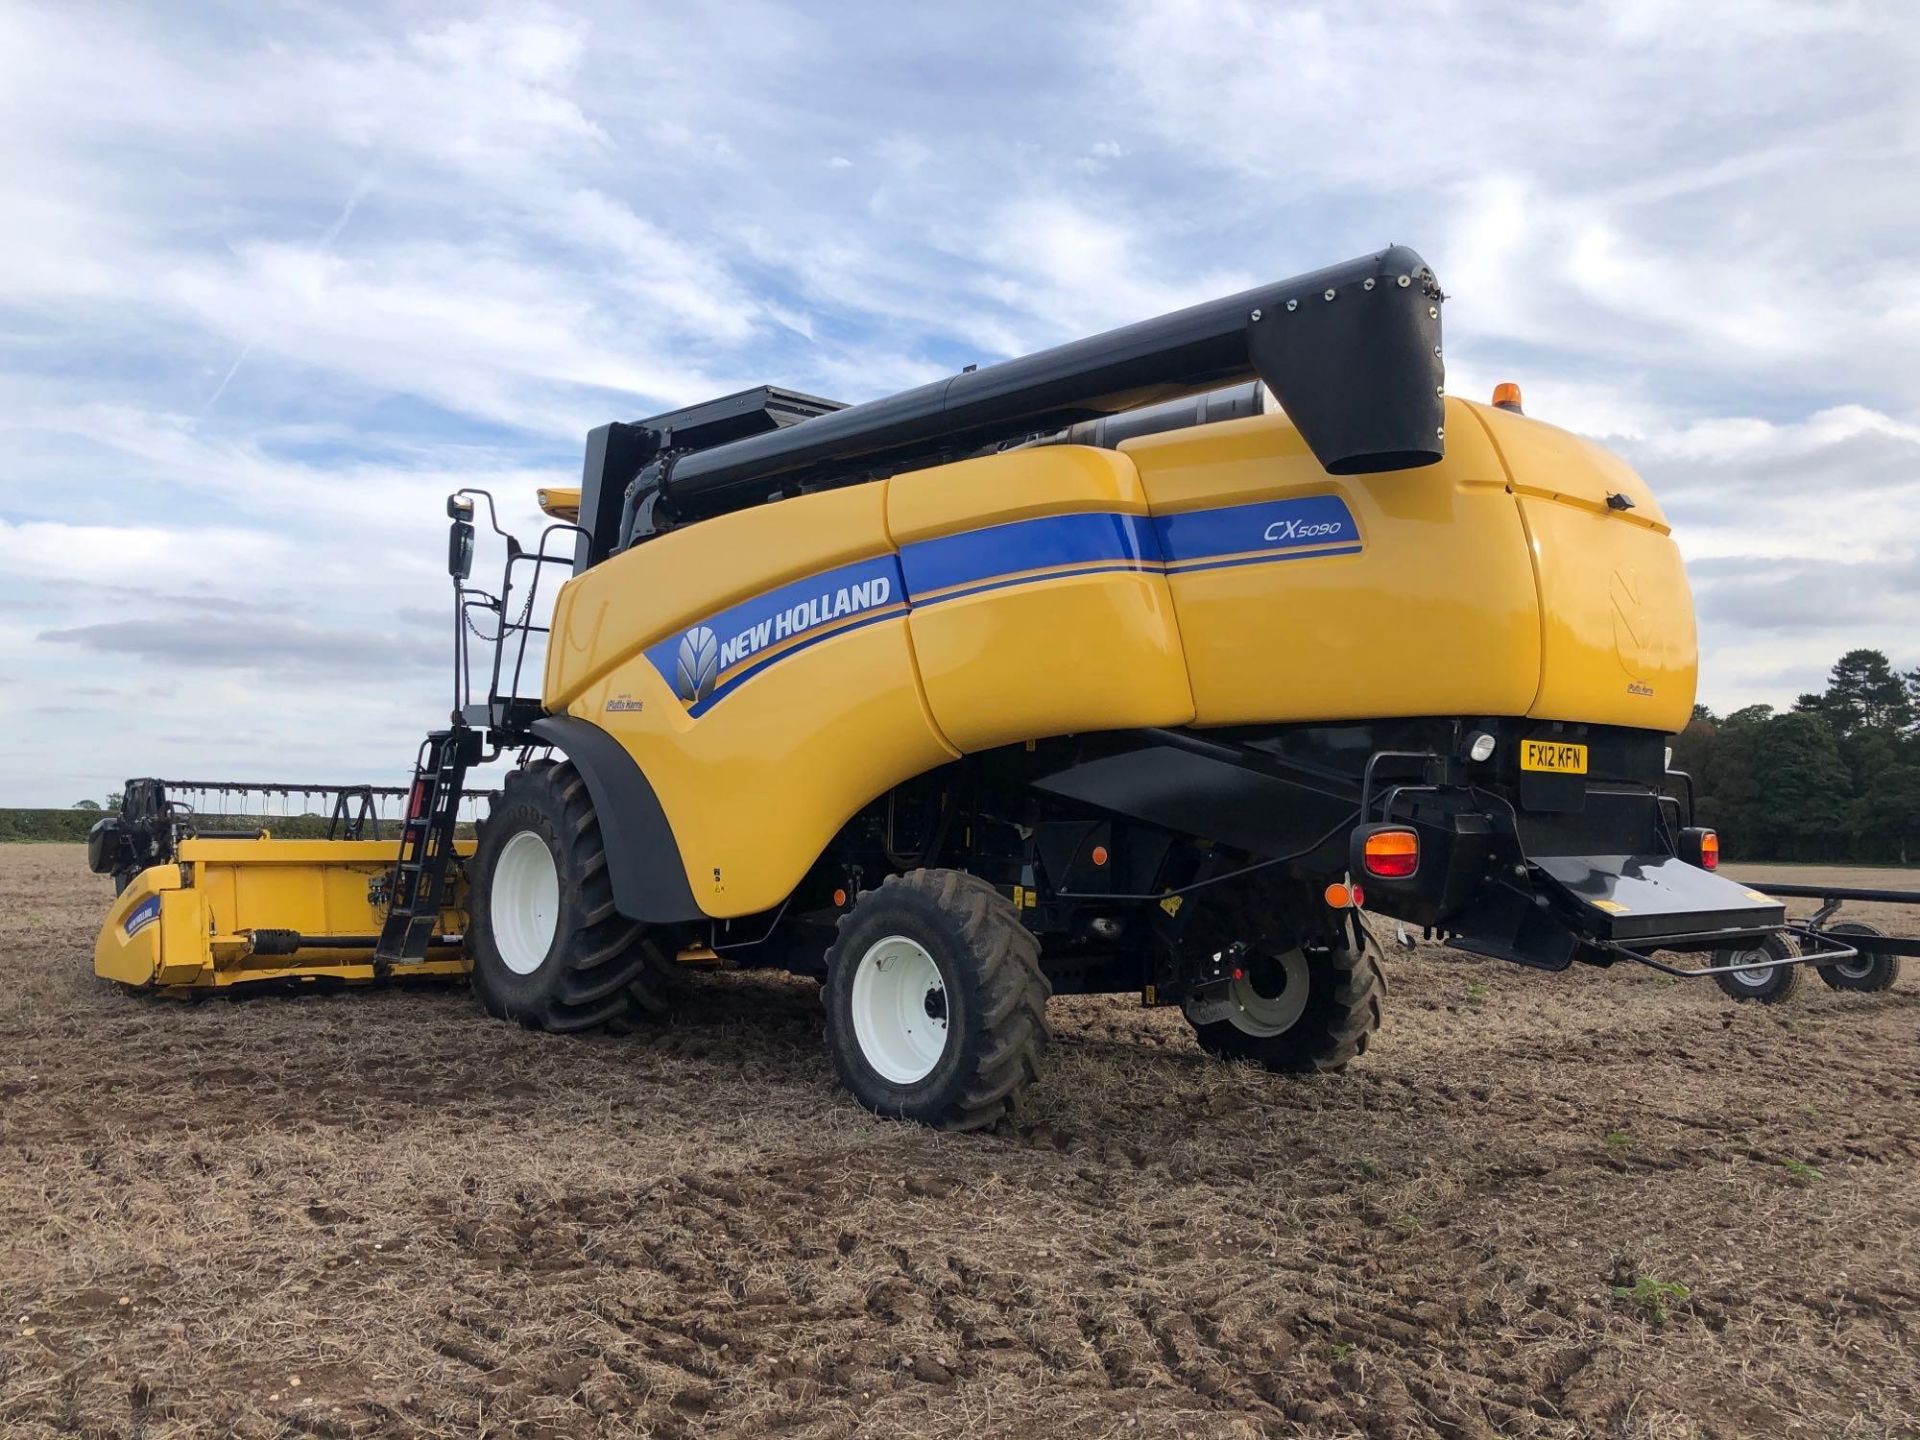 2011 New Holland CX5090 combine harvester with 20ft Varifeed header and trolley and straw chopper on - Image 30 of 33